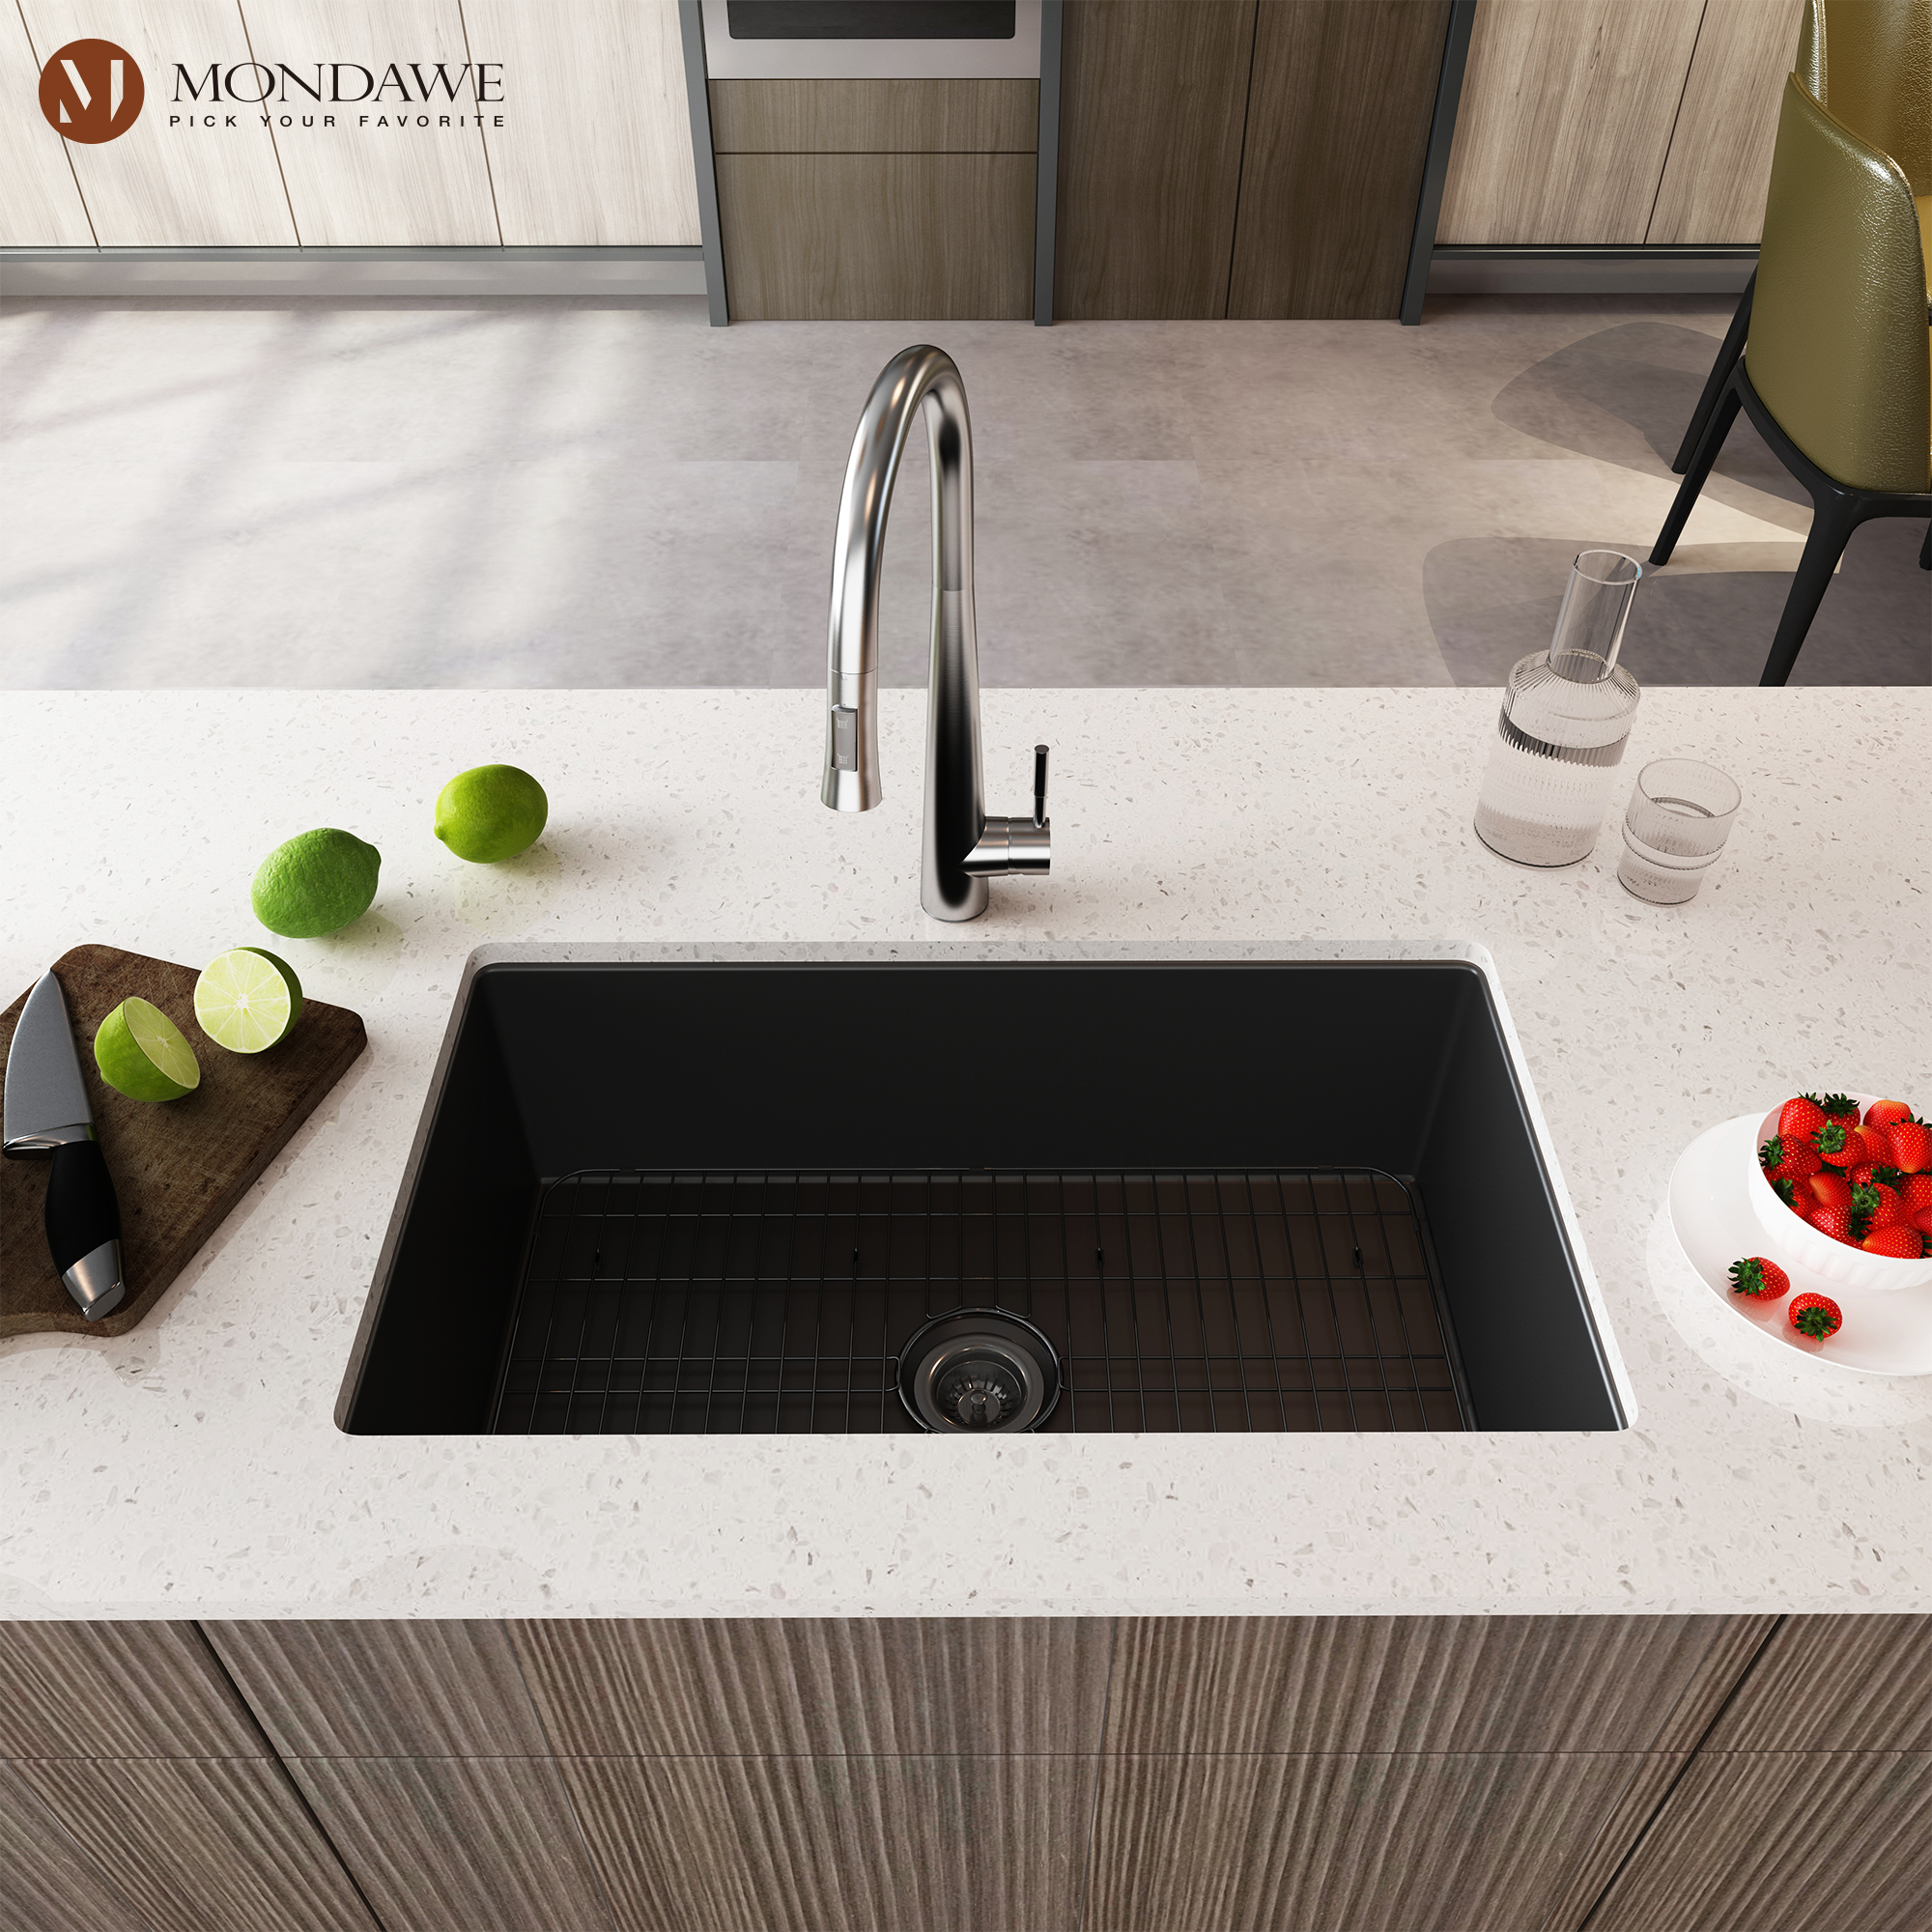 Undermount 32 in. single bowl fireclay kitchen sink in white comes with stainless steel bottom grid and strainer-Mondawe